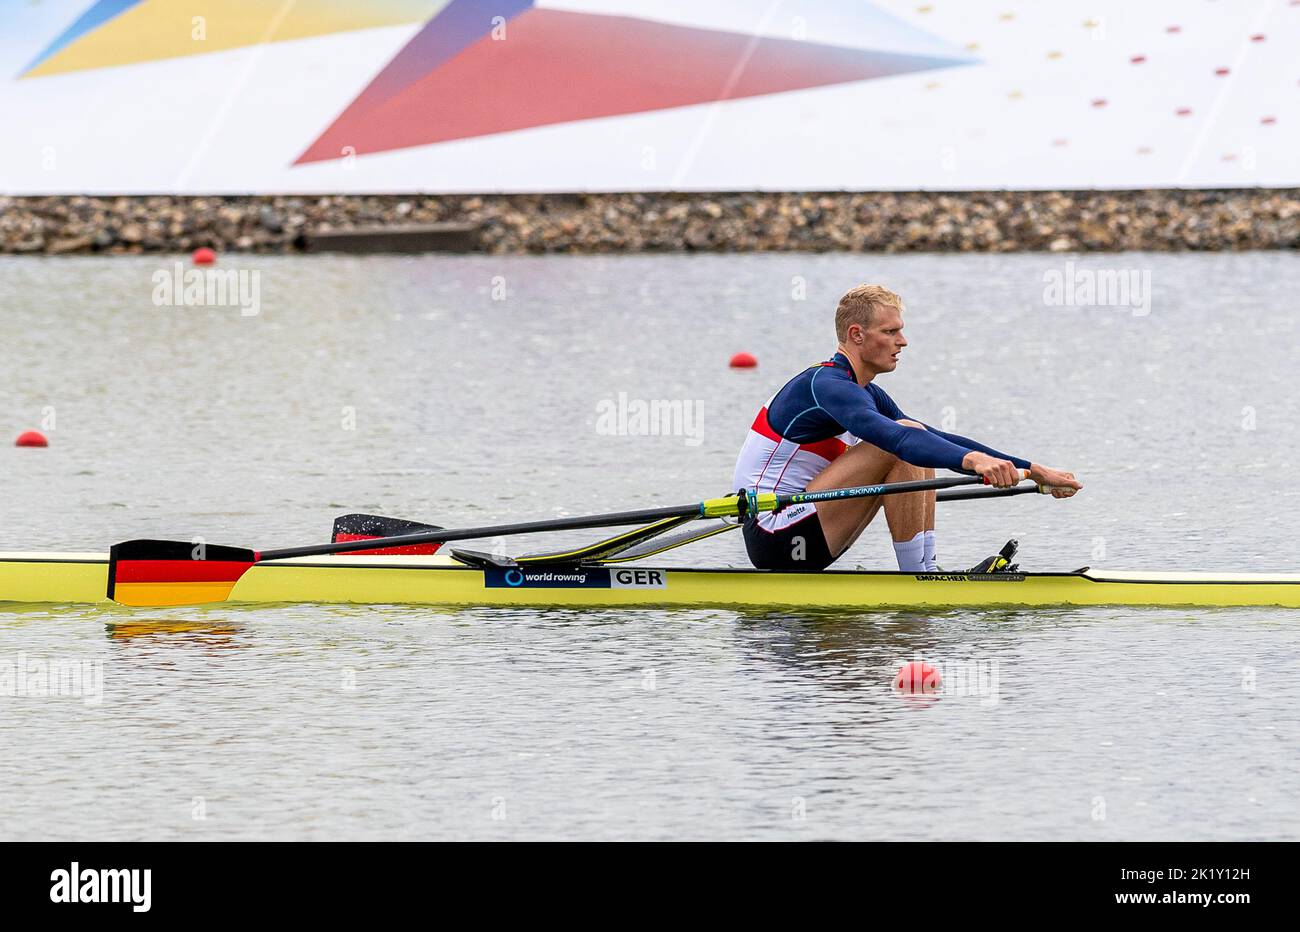 Racice, Czech Republic. 21st Sep, 2022. Oliver Zeidler of Germany competing during Day 4 of the 2022 World Rowing Championships at the Labe Arena Racice on September 21, 2022 in Racice, Czech Republic. Credit: Ondrej Hajek/CTK Photo/Alamy Live News Stock Photo